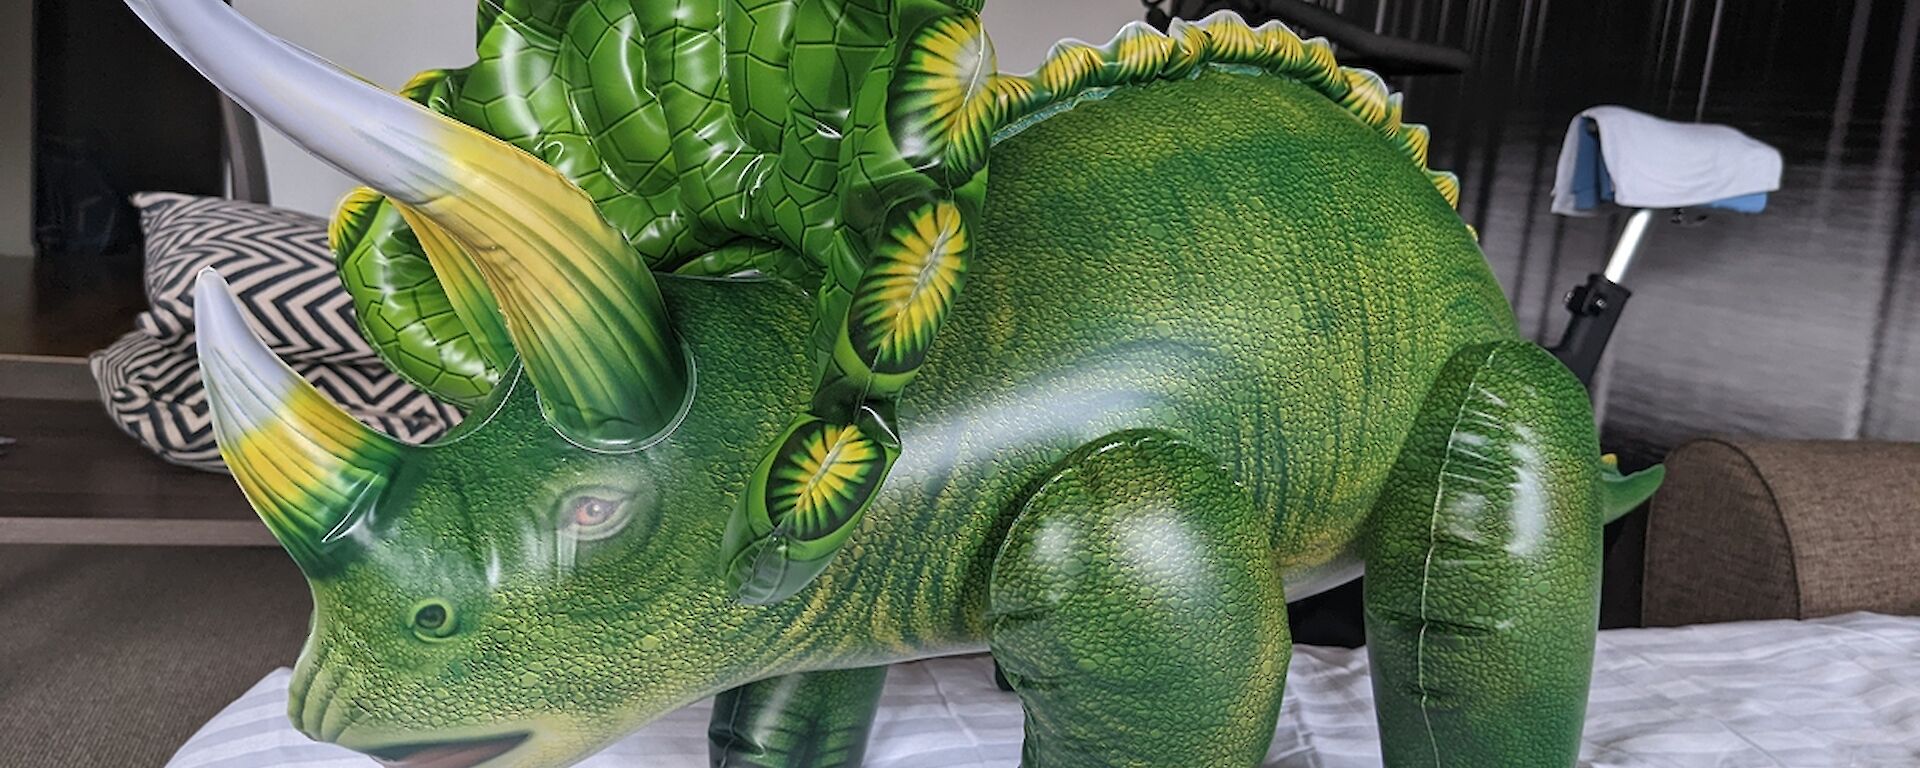 Inflatable triceratops toy stands on bed in hotel room